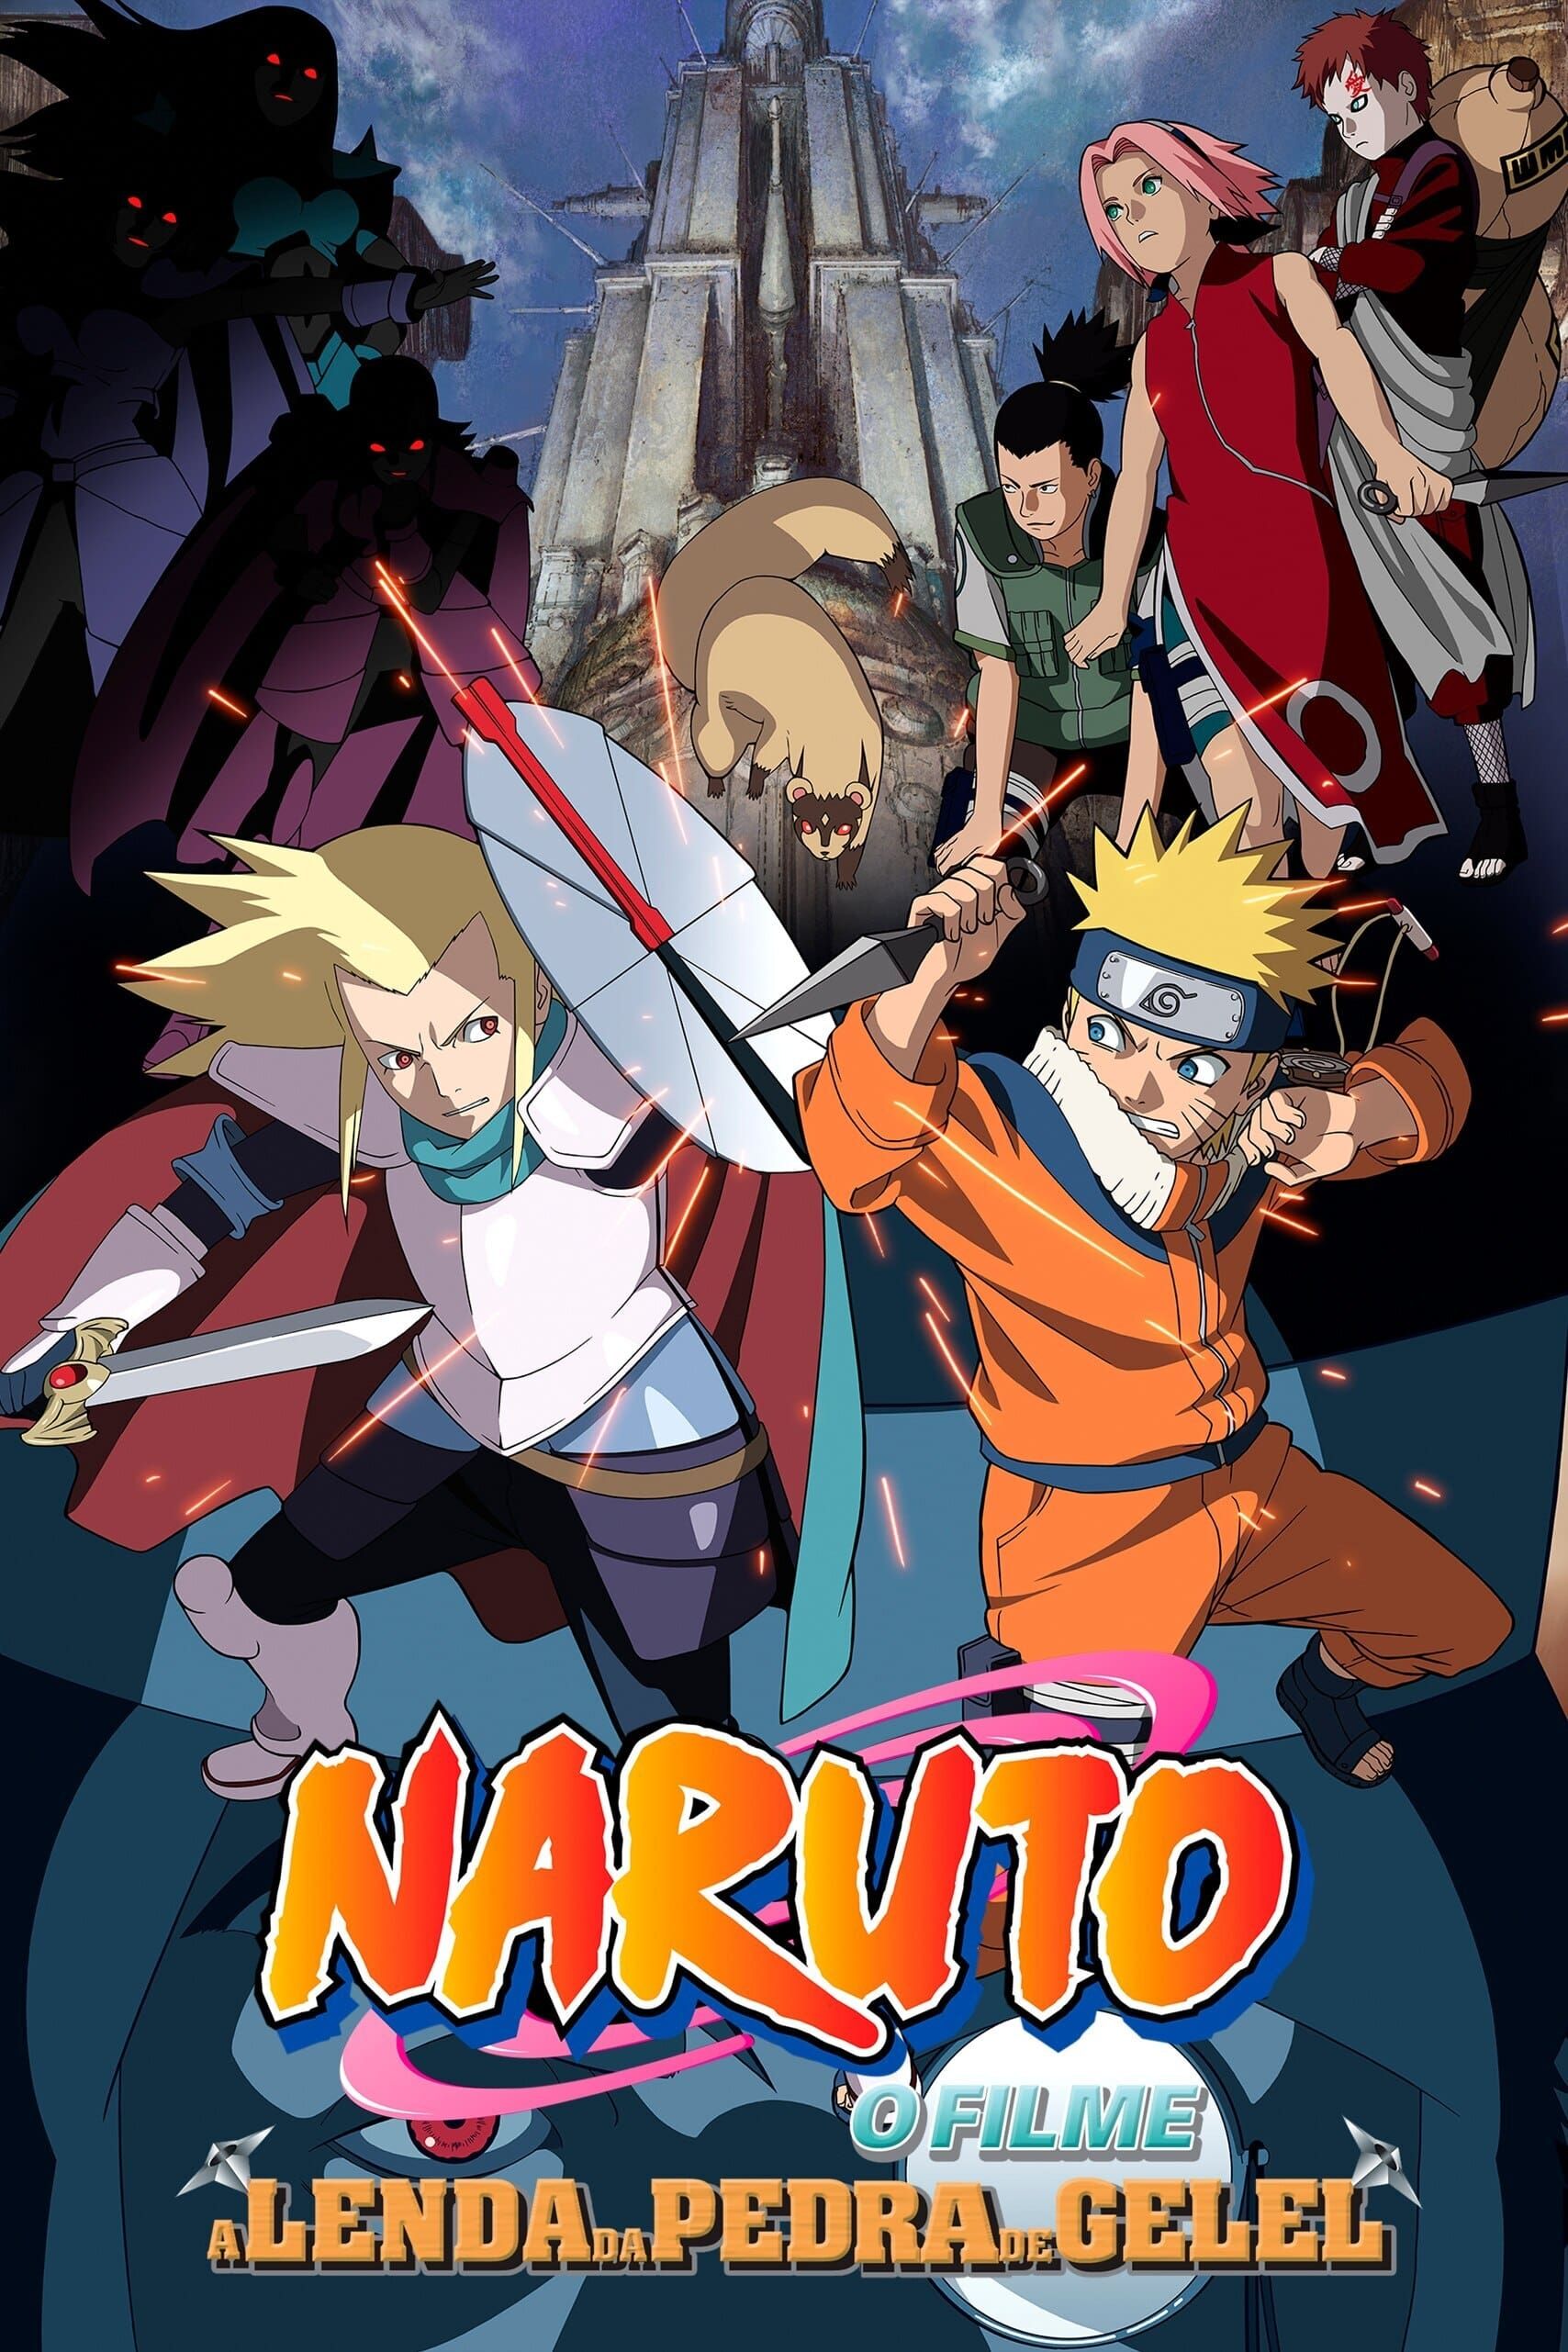 Naruto the Movie 2: Legend of the Stone of Gelel (Dub) (Movie) Part 2